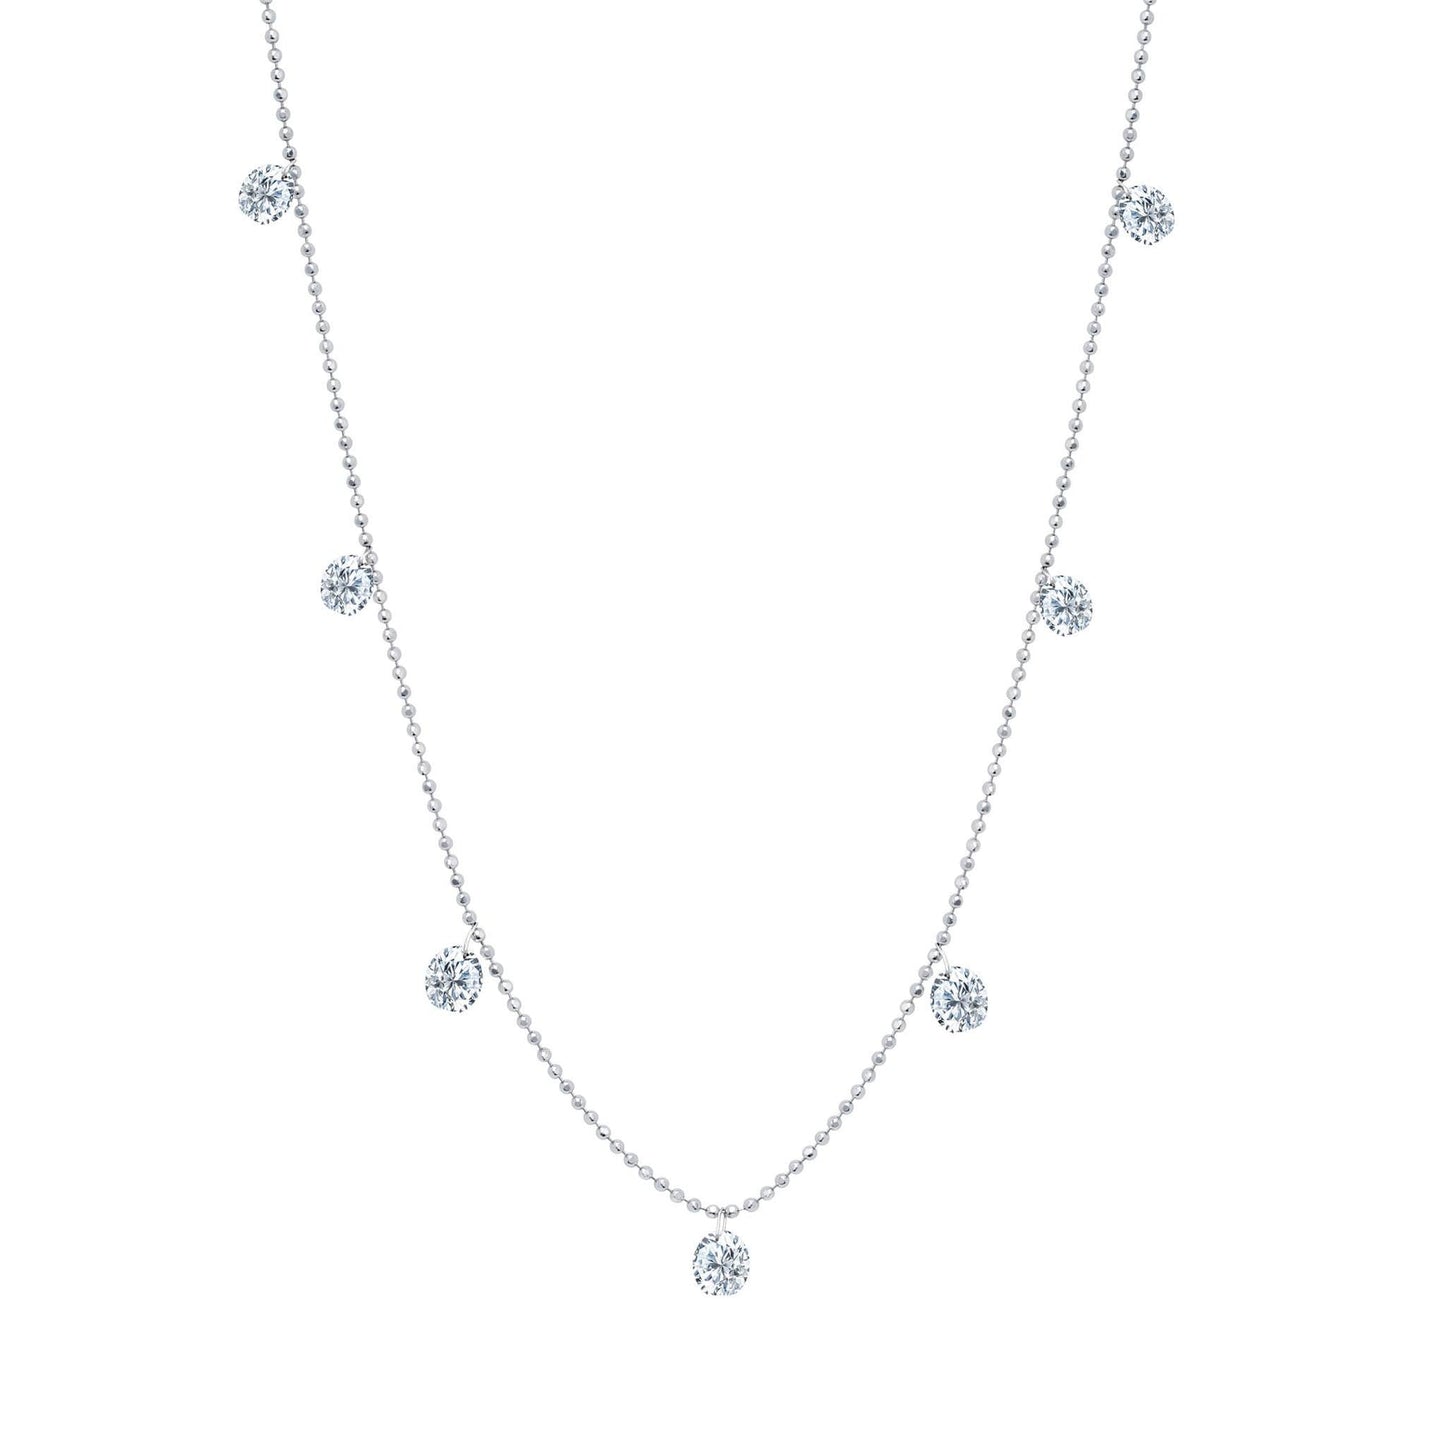 Small Floating Diamond Necklace in White